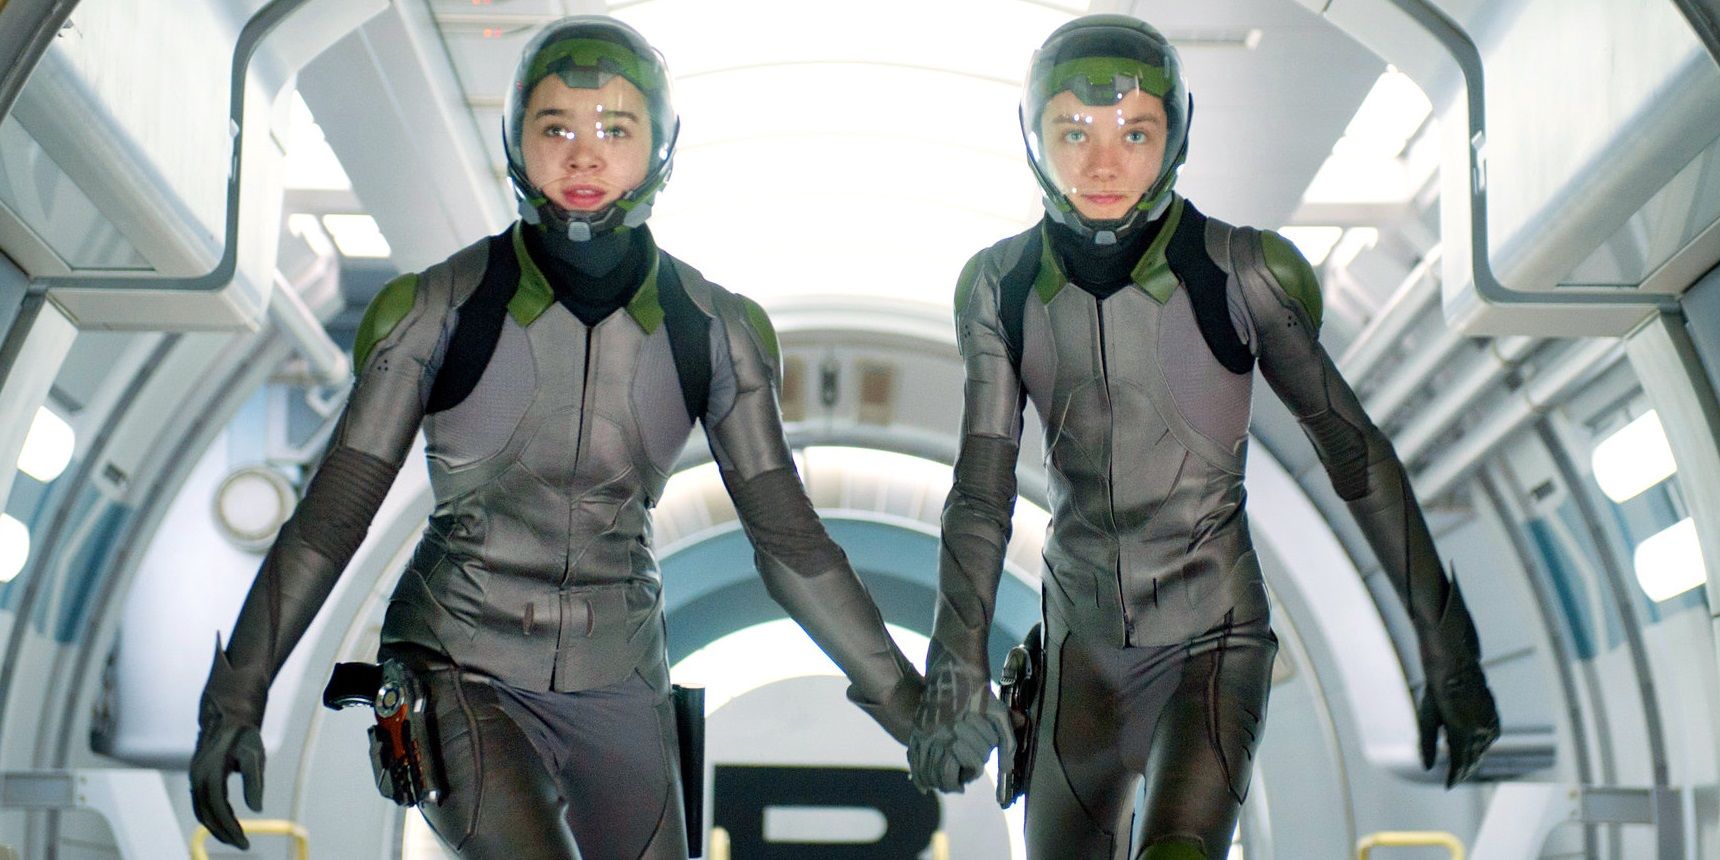 Asa Butterfield and Hailee Steinfeld in spacesuits in Ender's Game